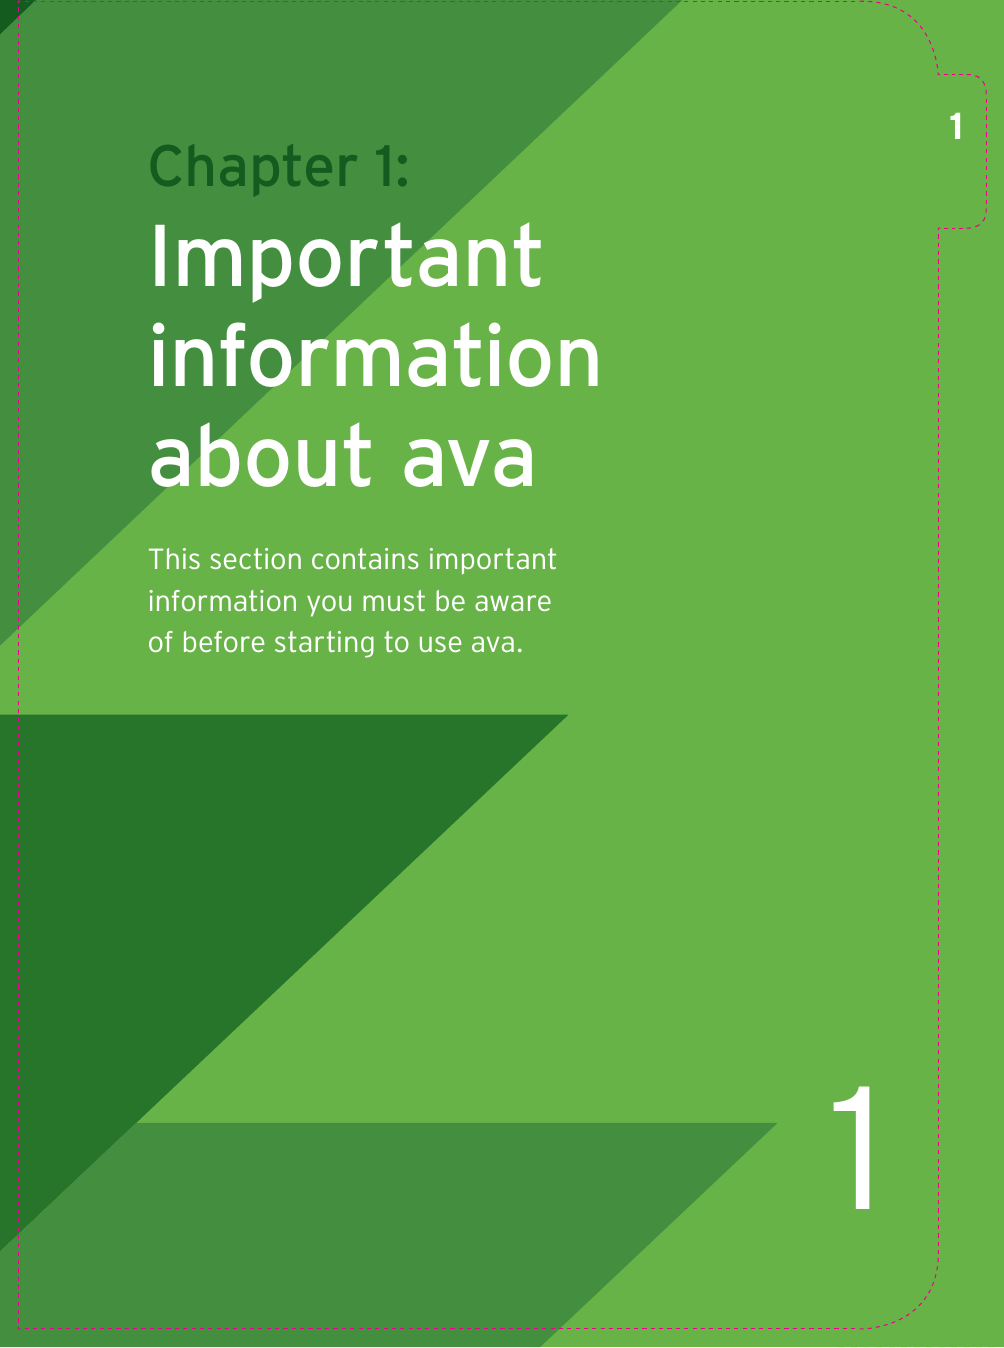 1Chapter 1: Important information about avaThis section contains important information you must be aware of before starting to use ava.1